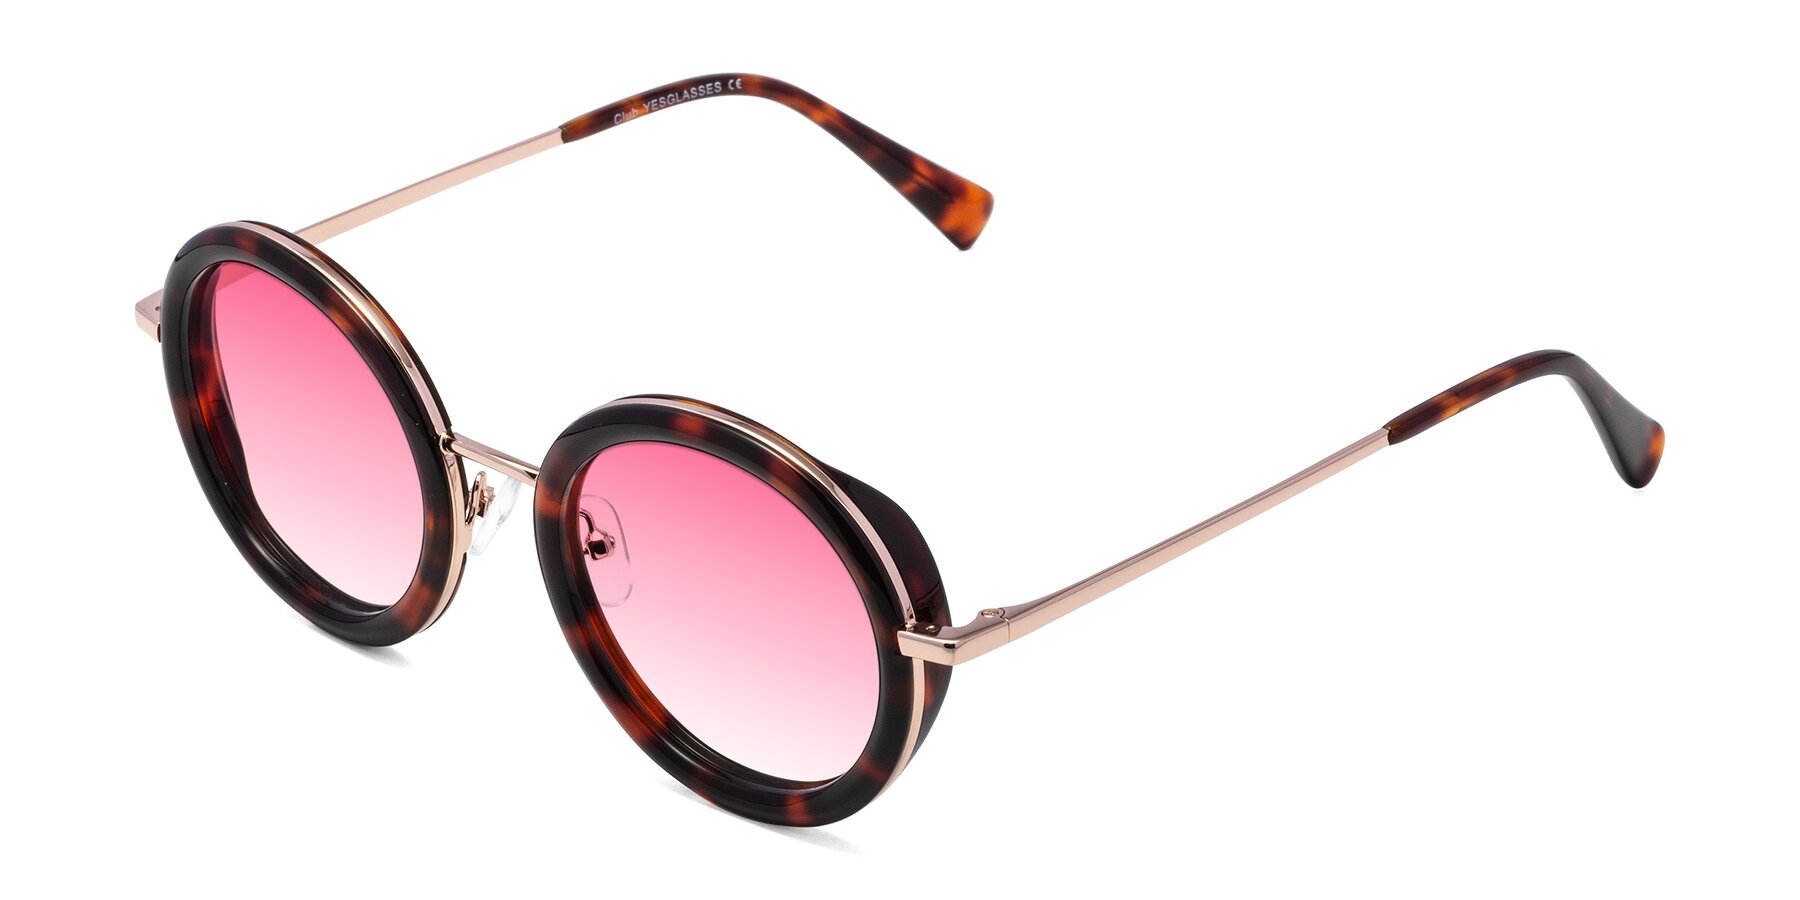 Angle of Club in Tortoise-Rose Gold with Pink Gradient Lenses